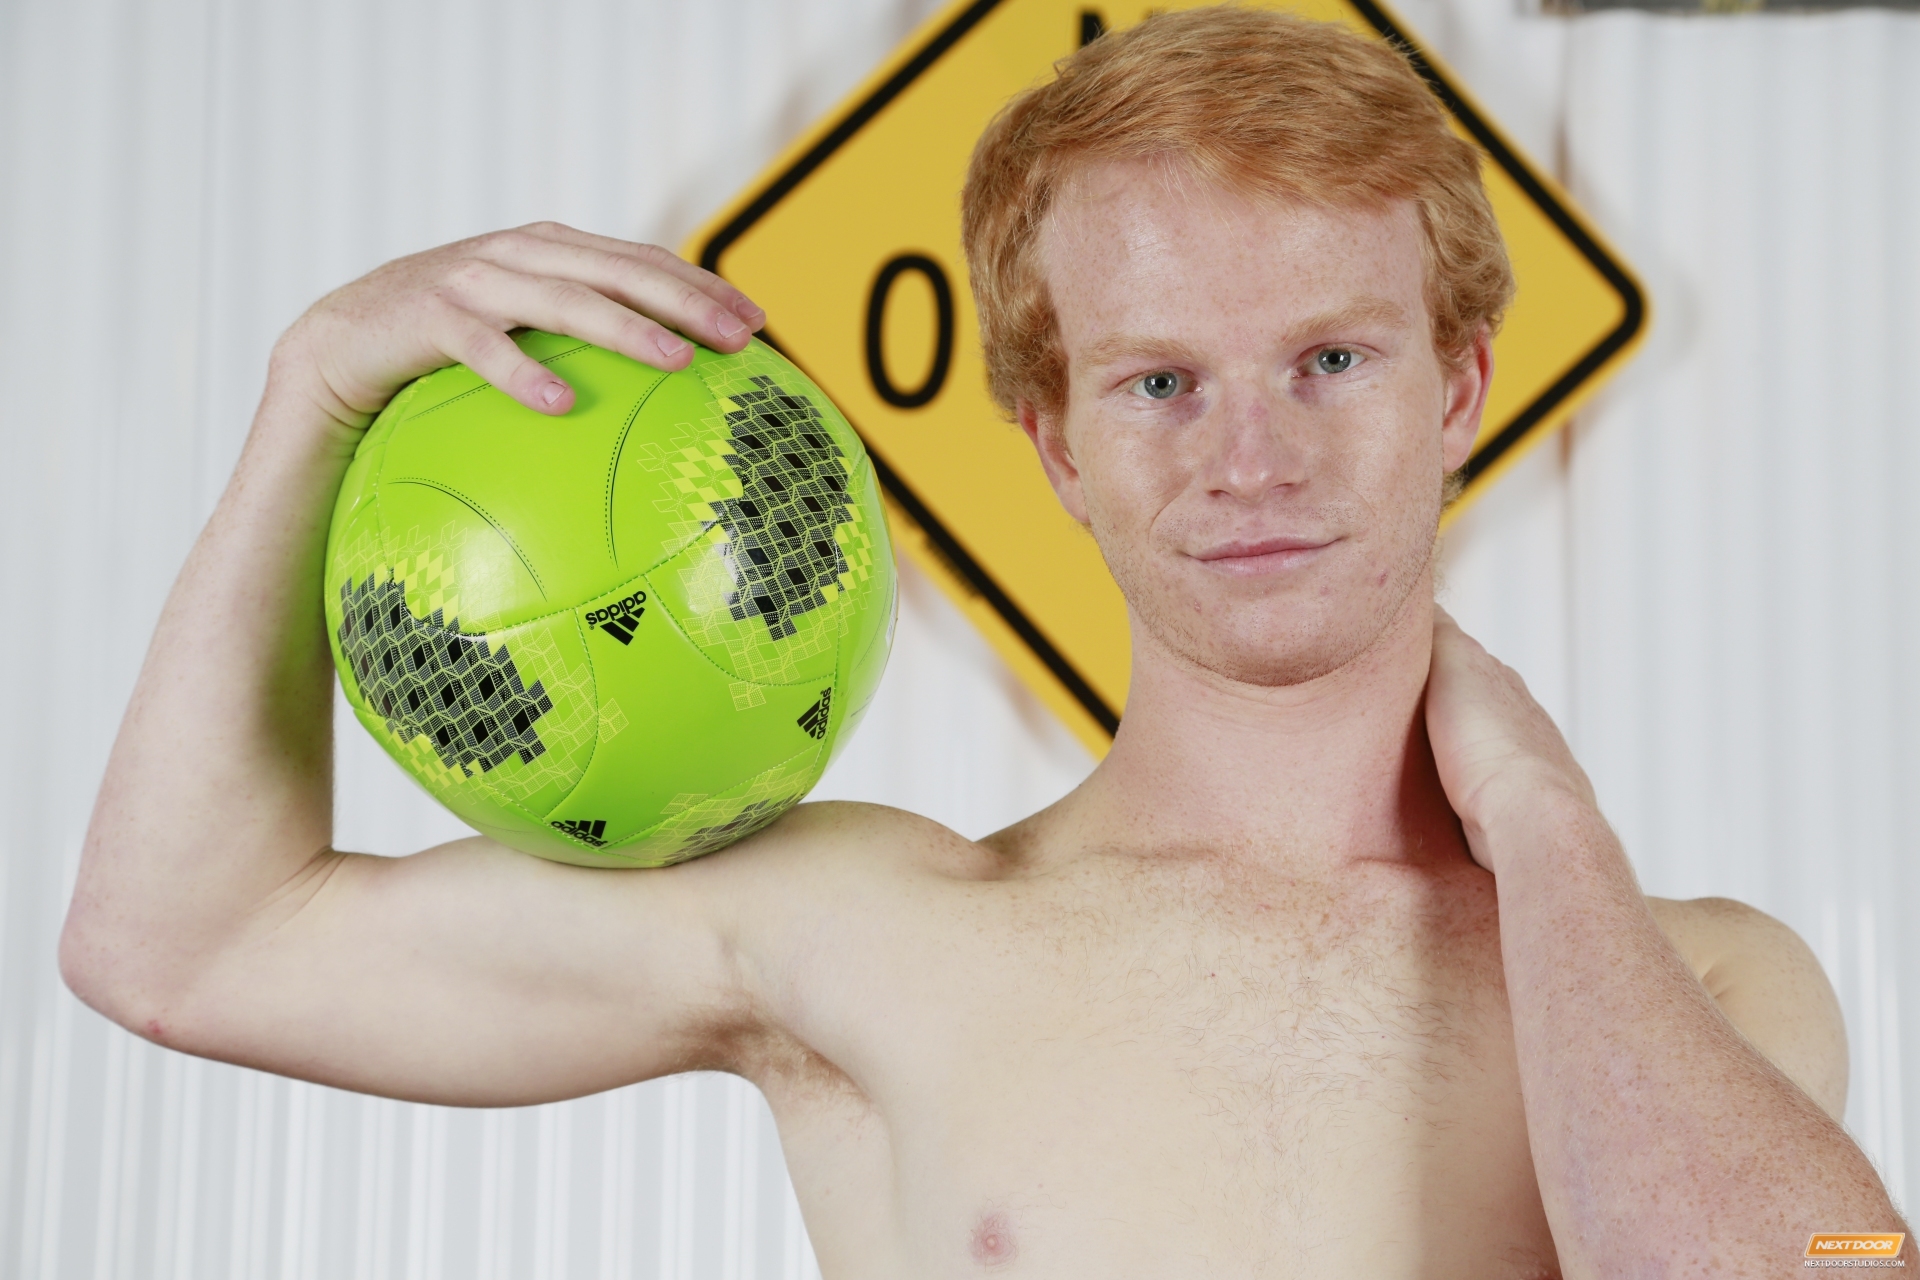 Colby Klein and Caleb Reece have a threesome with hot ginger boy slut Jacob A in Soccer Pals by gay porn site Next Door Twink.